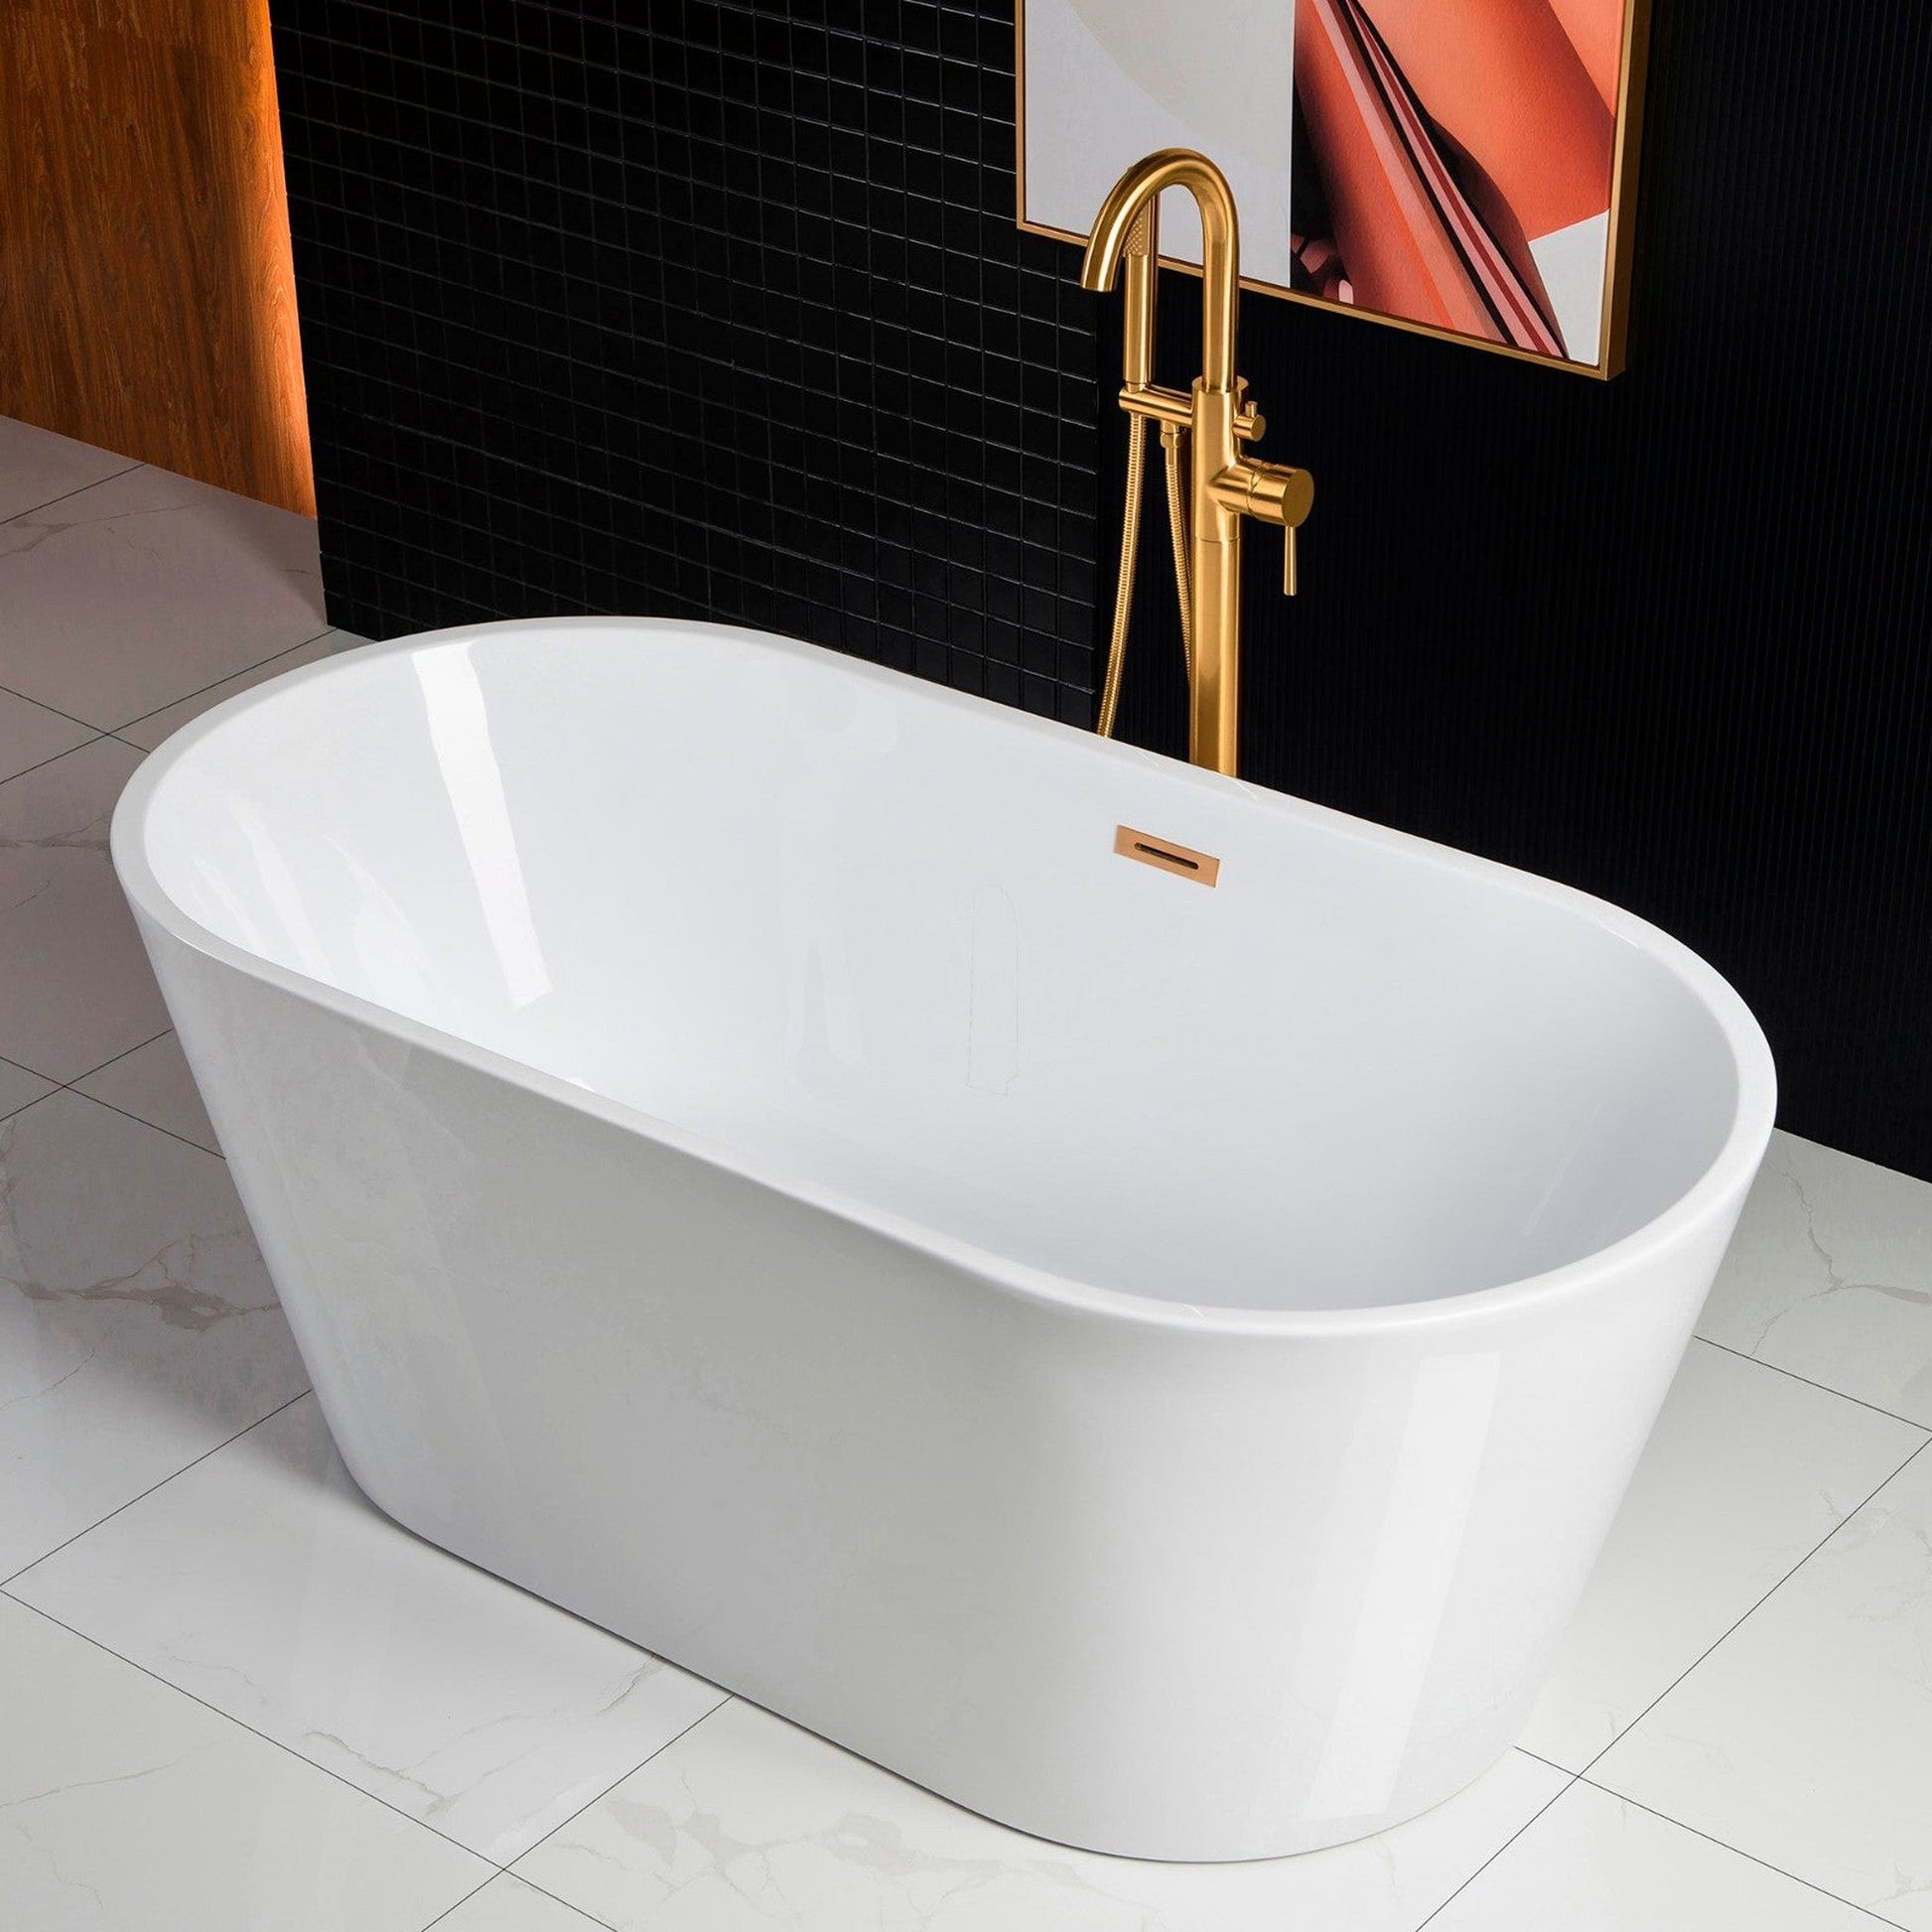 WoodBridge B0014 59" White Acrylic Freestanding Soaking Bathtub With Brushed Gold Drain, Overflow, F0026BGVT Tub Filler and Caddy Tray